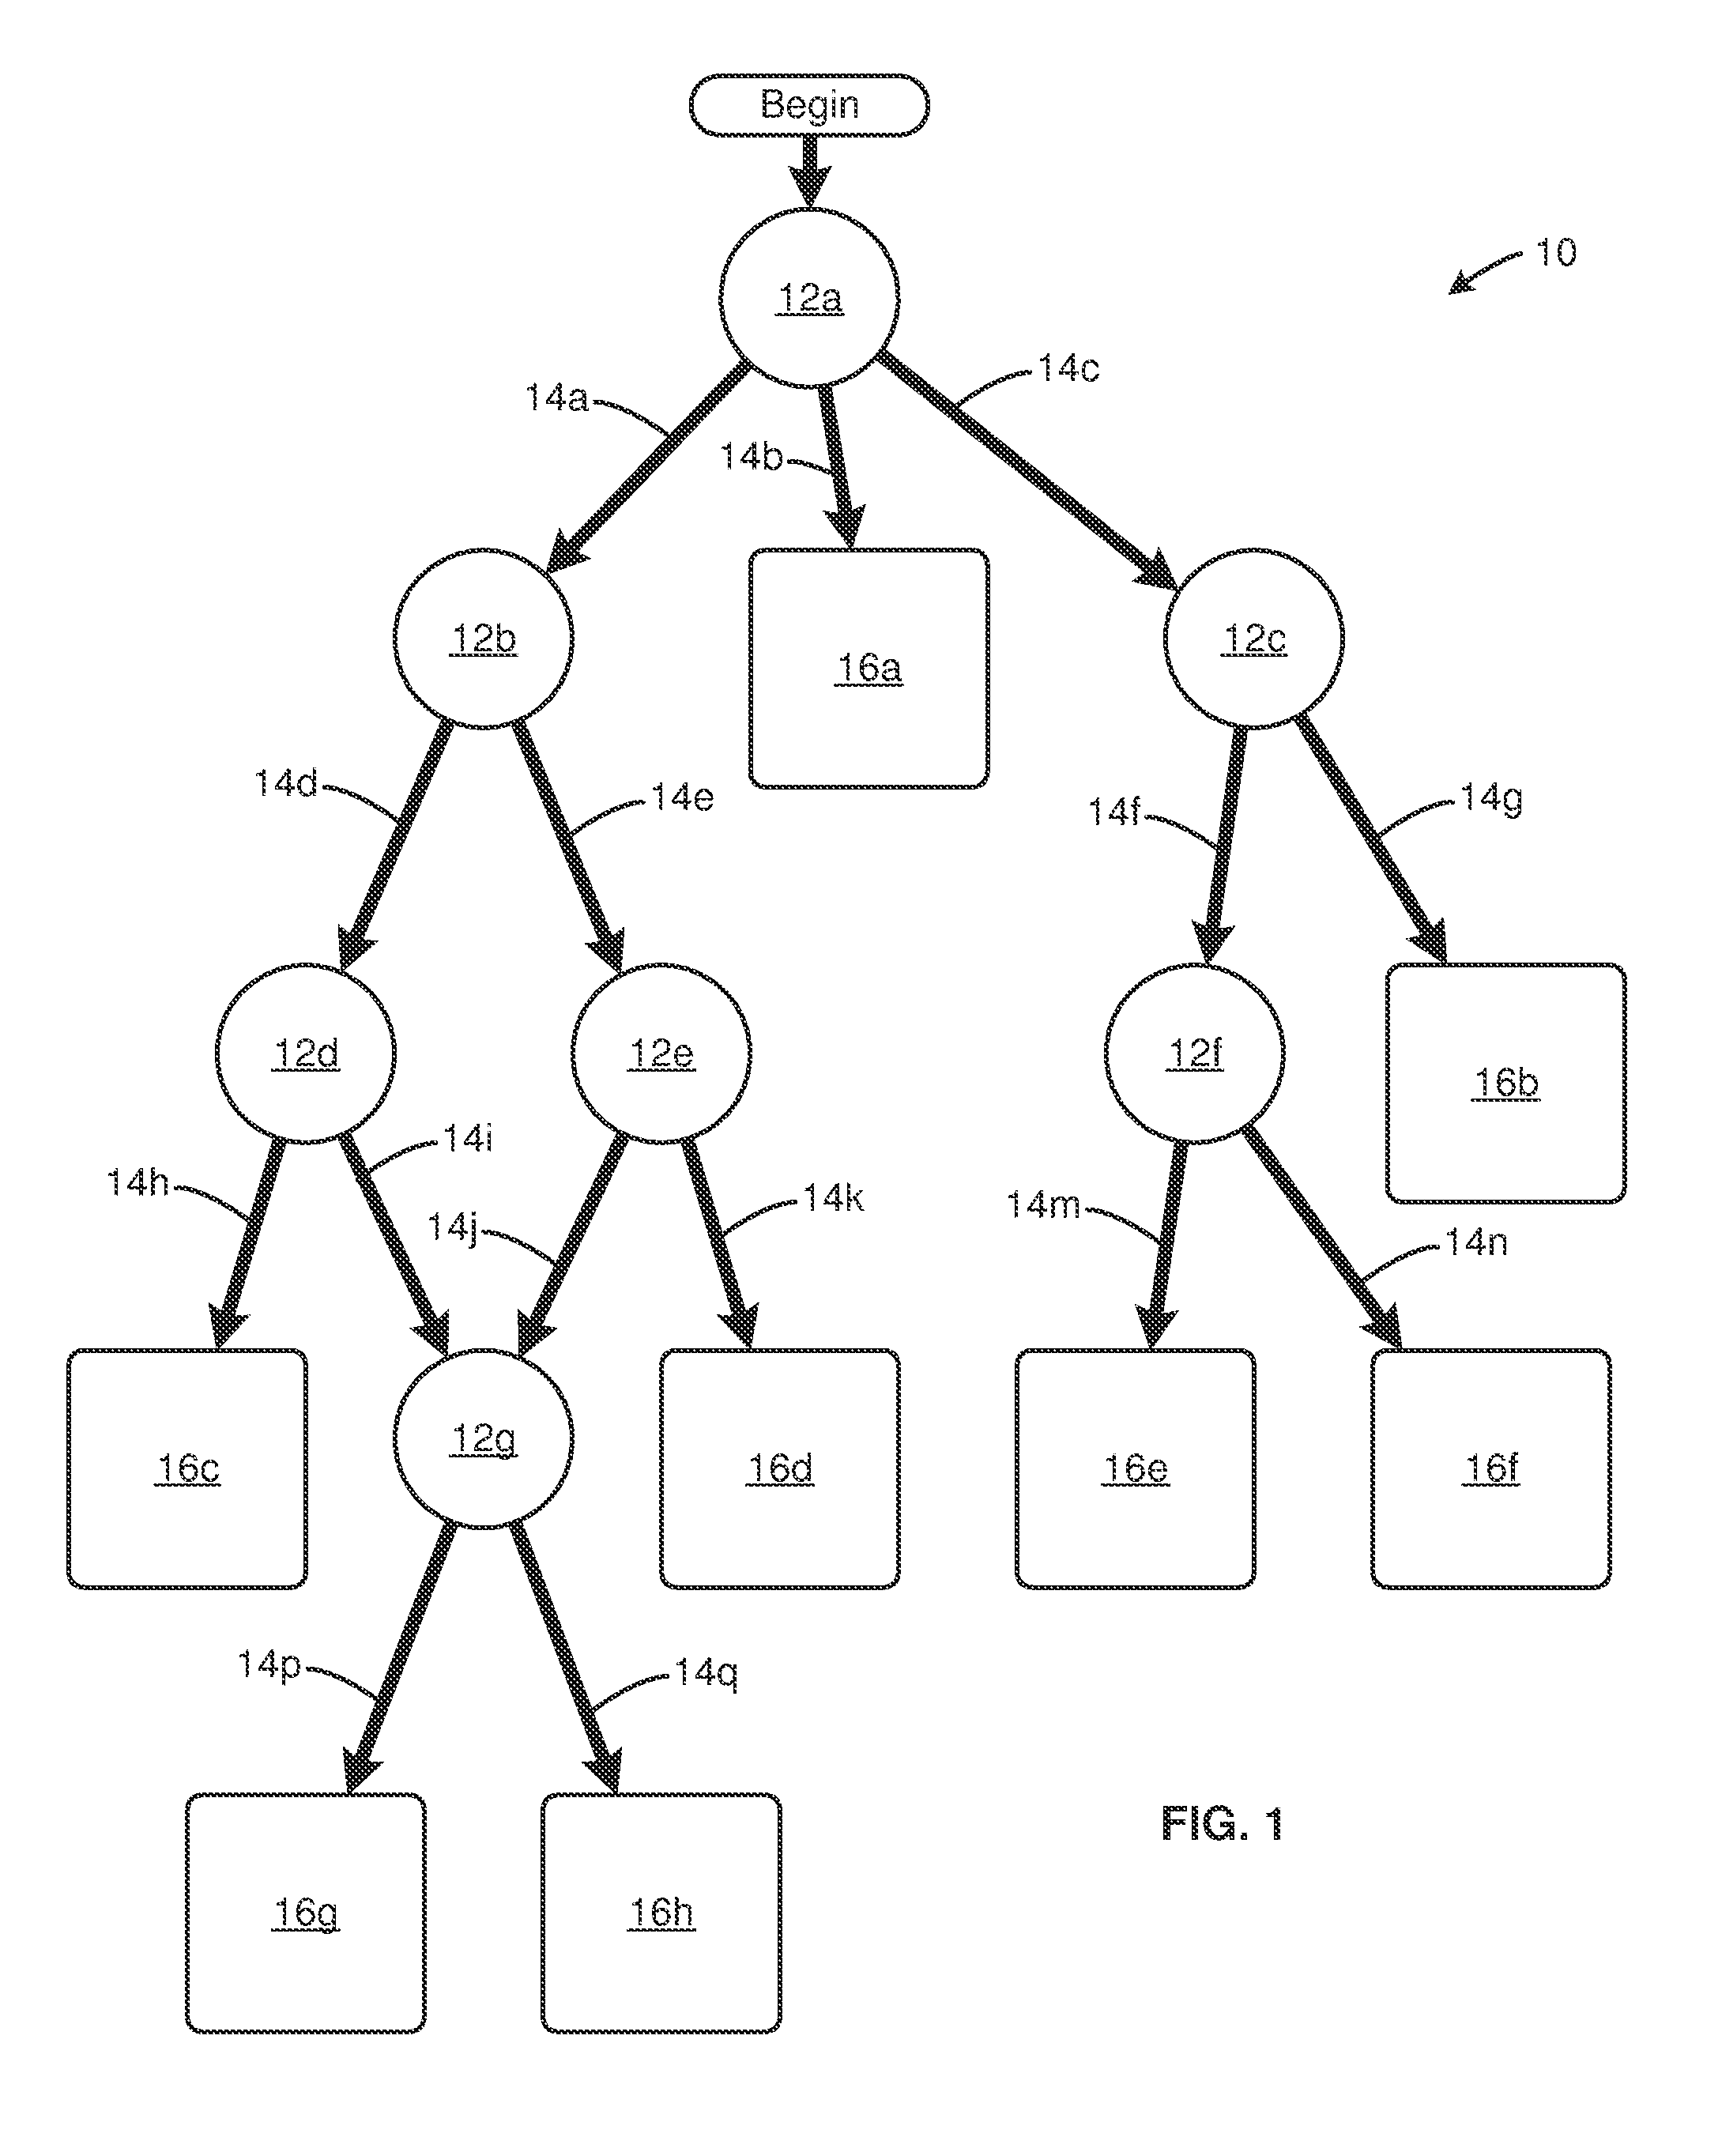 Decision tree with set-based nodal comparisons